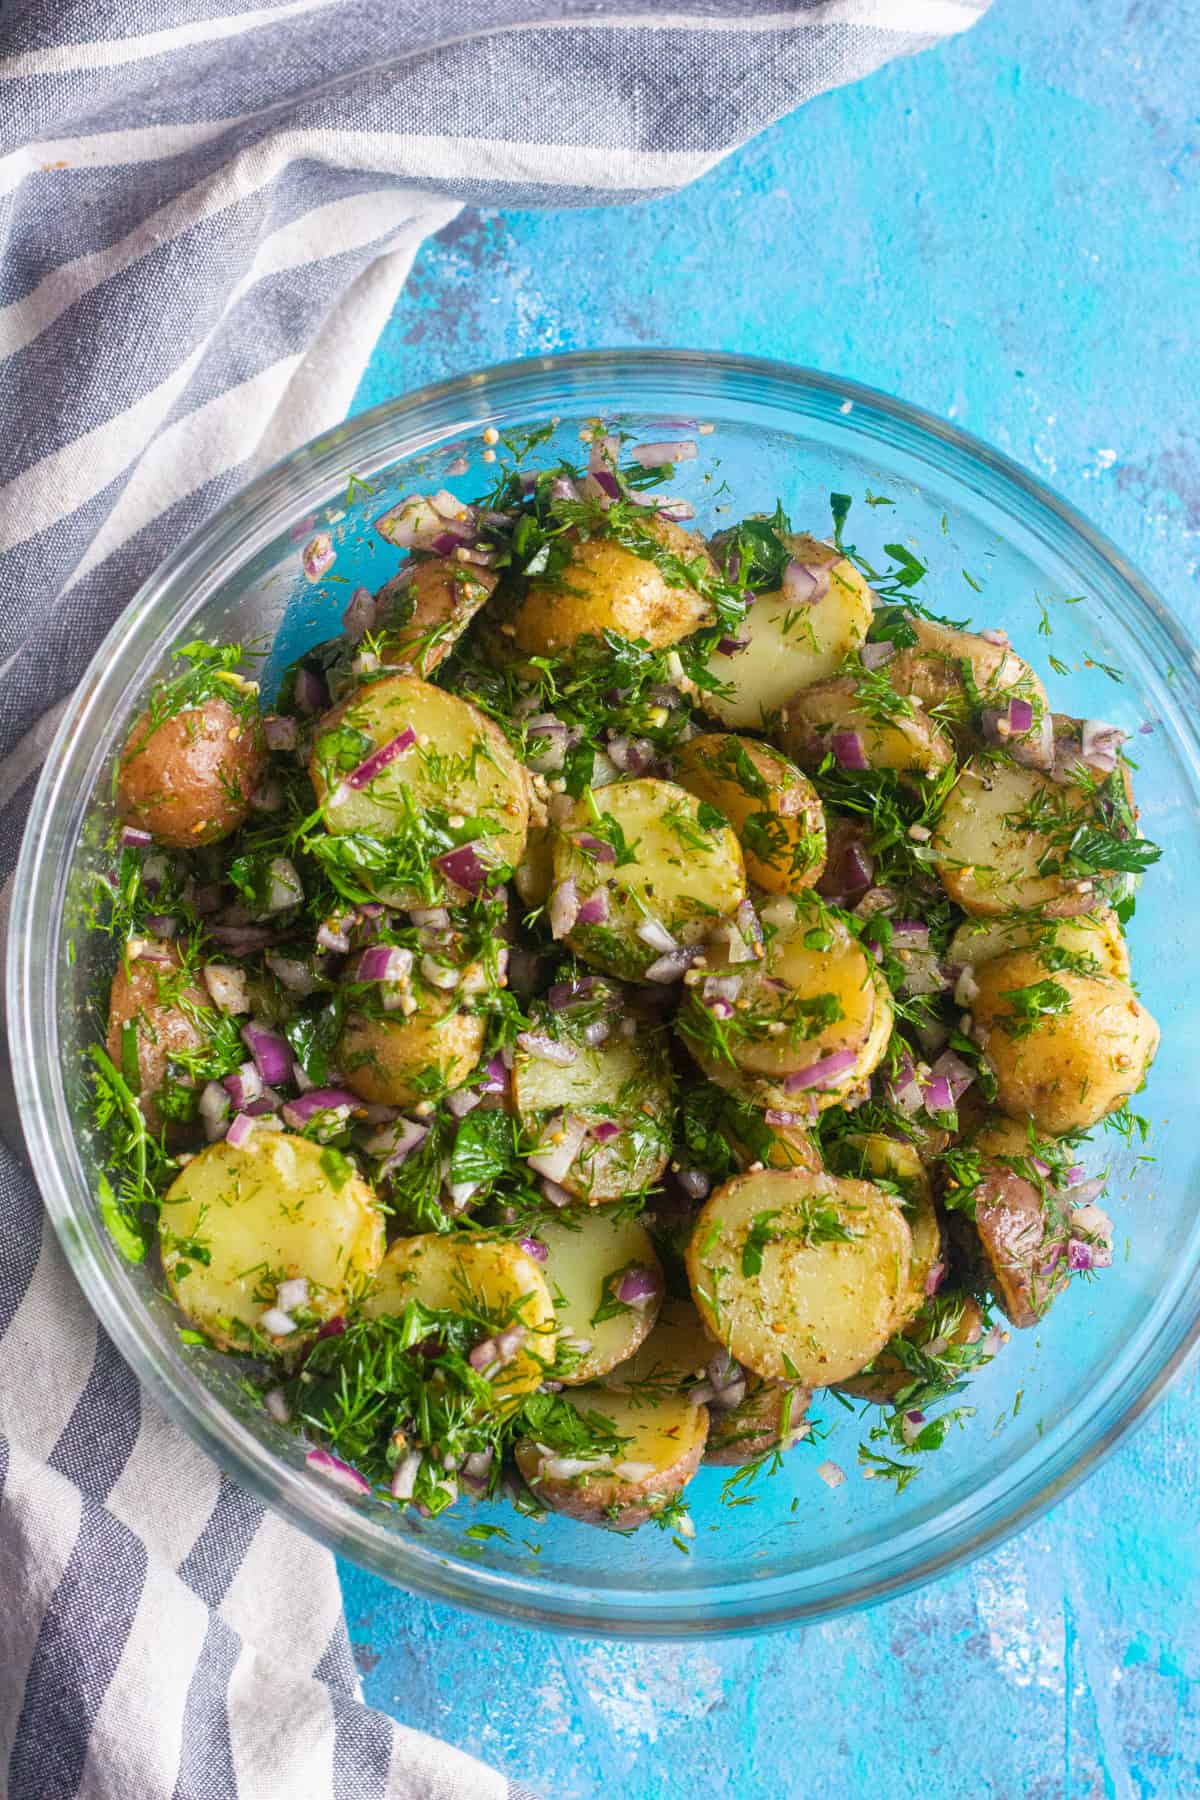 Mediterranean potato salad is so easy and simple. It's made with only a few ingredients and is packed with flavor thanks to a homemade zaatar dressing. 
